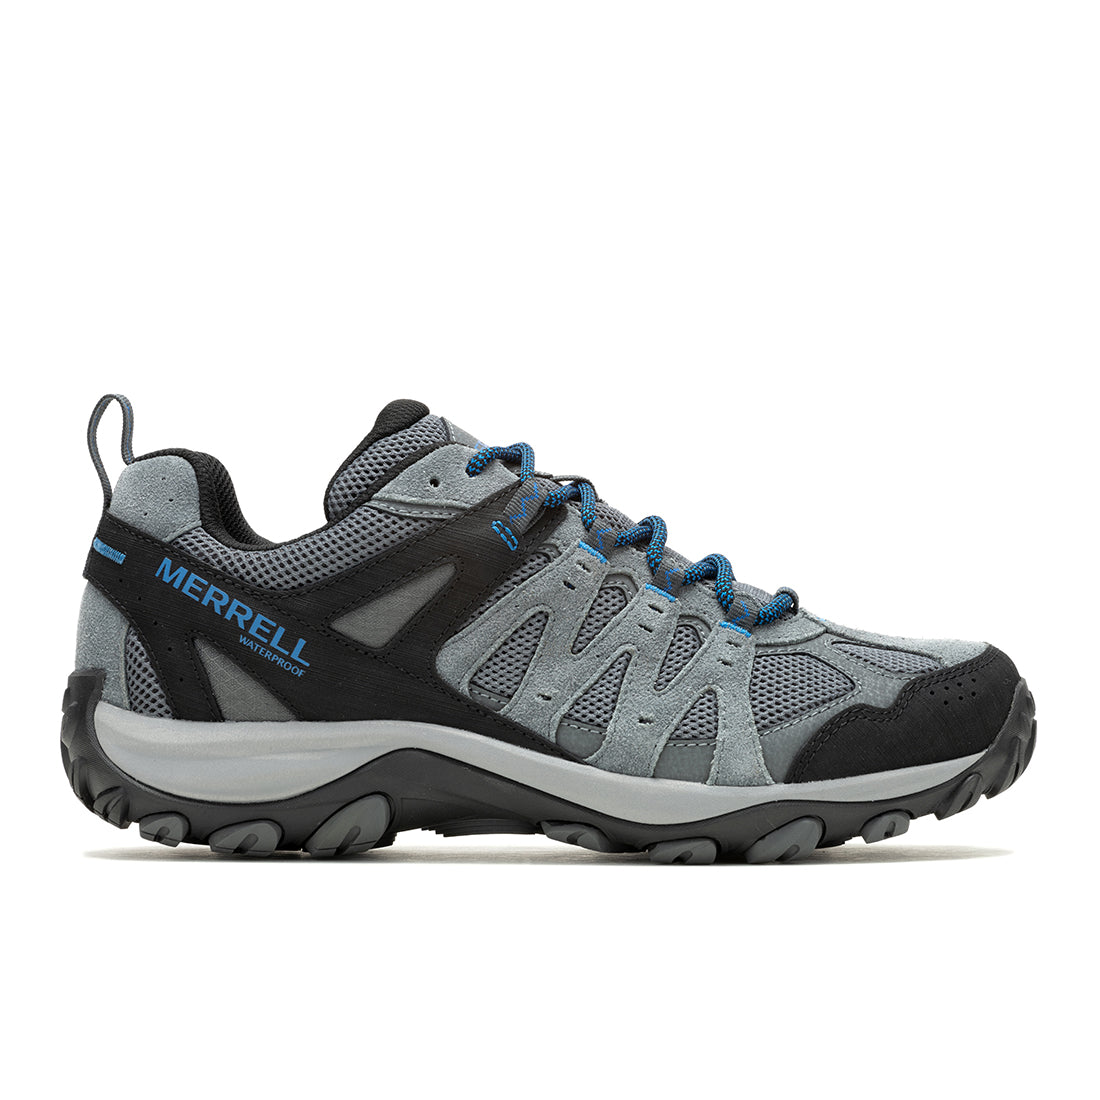 Accentor 3 Waterproof - Rock/Blue Mens Hiking Shoes